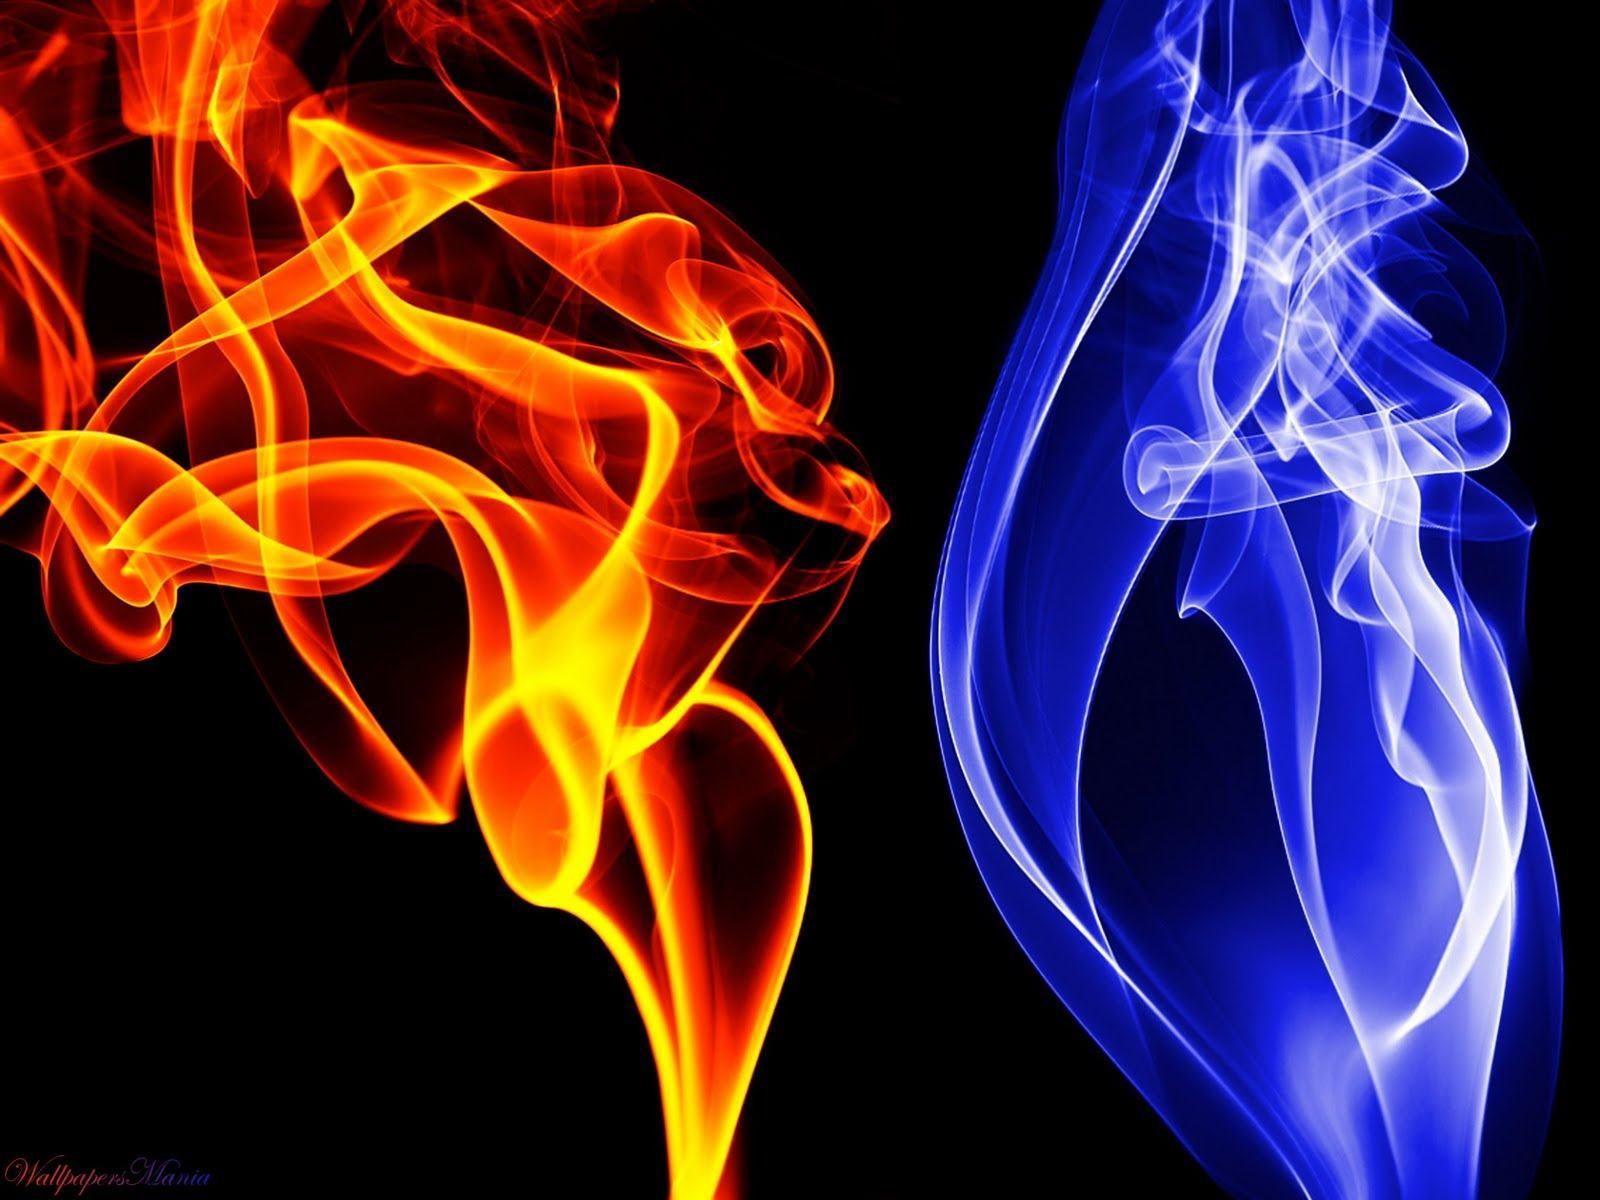 Blue Flame Wallpaper. Fire and ice wallpaper